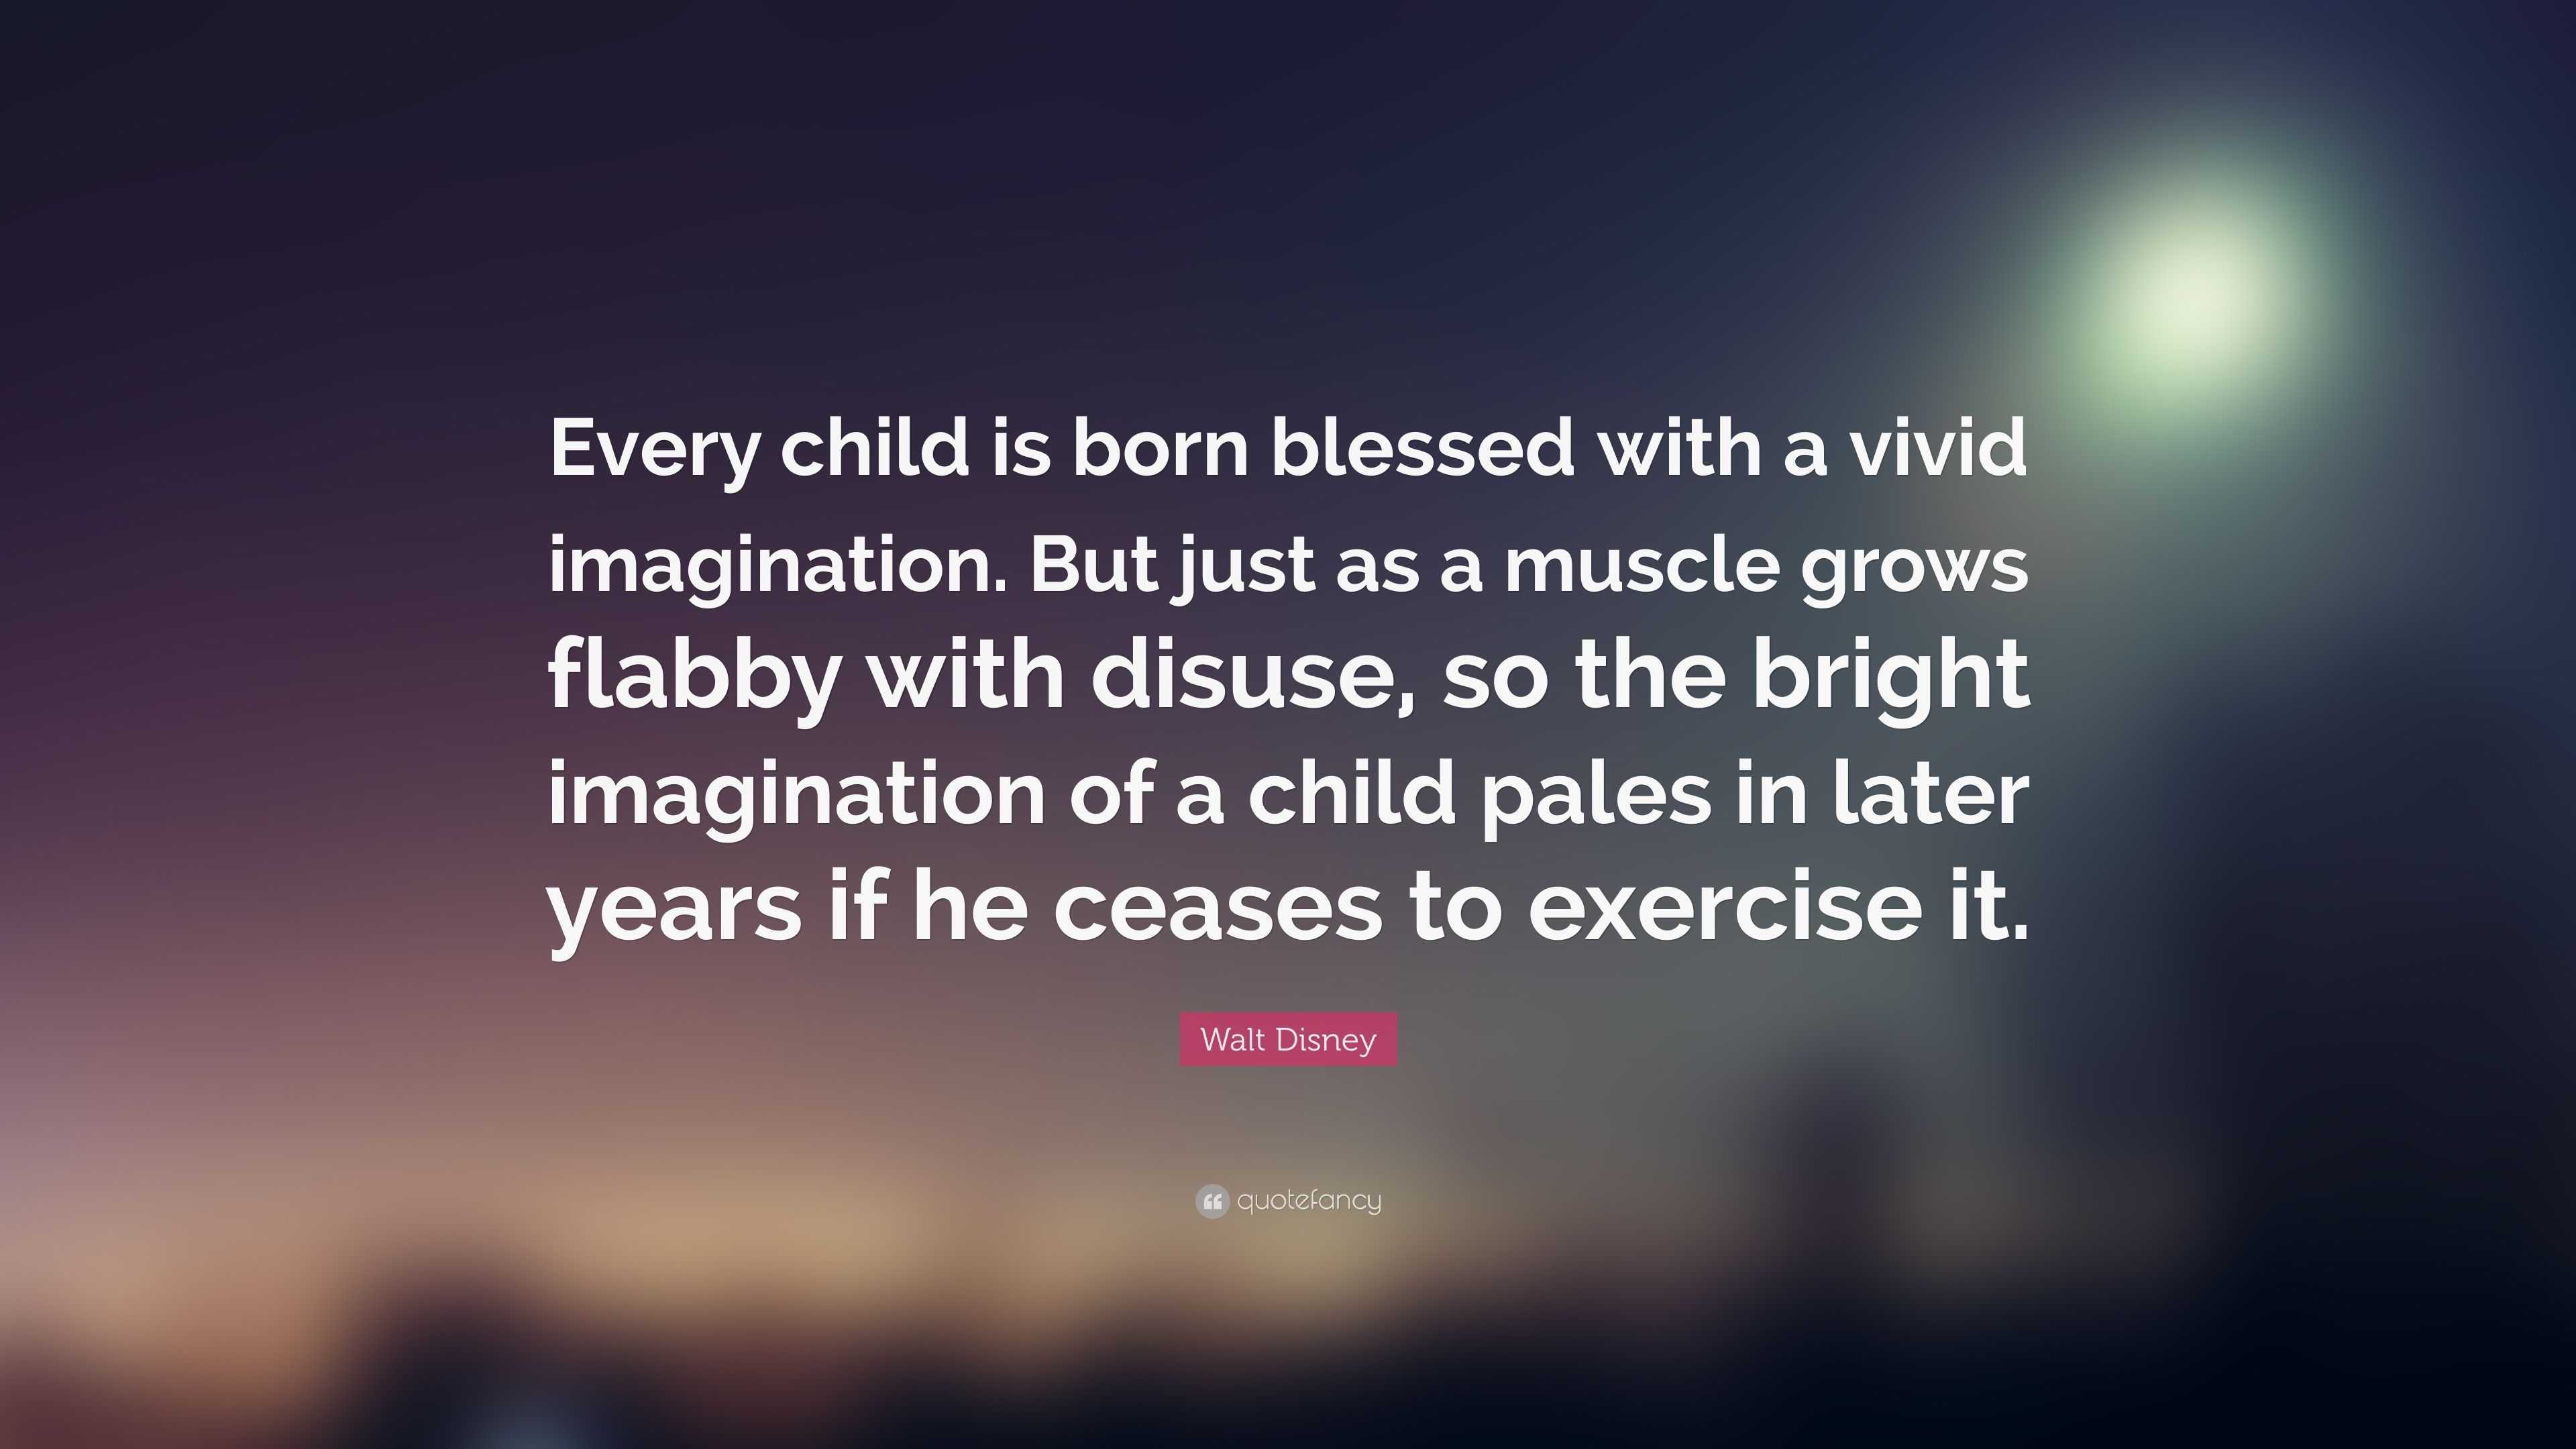 Walt Disney Quote: “Every child is born blessed with a vivid ...